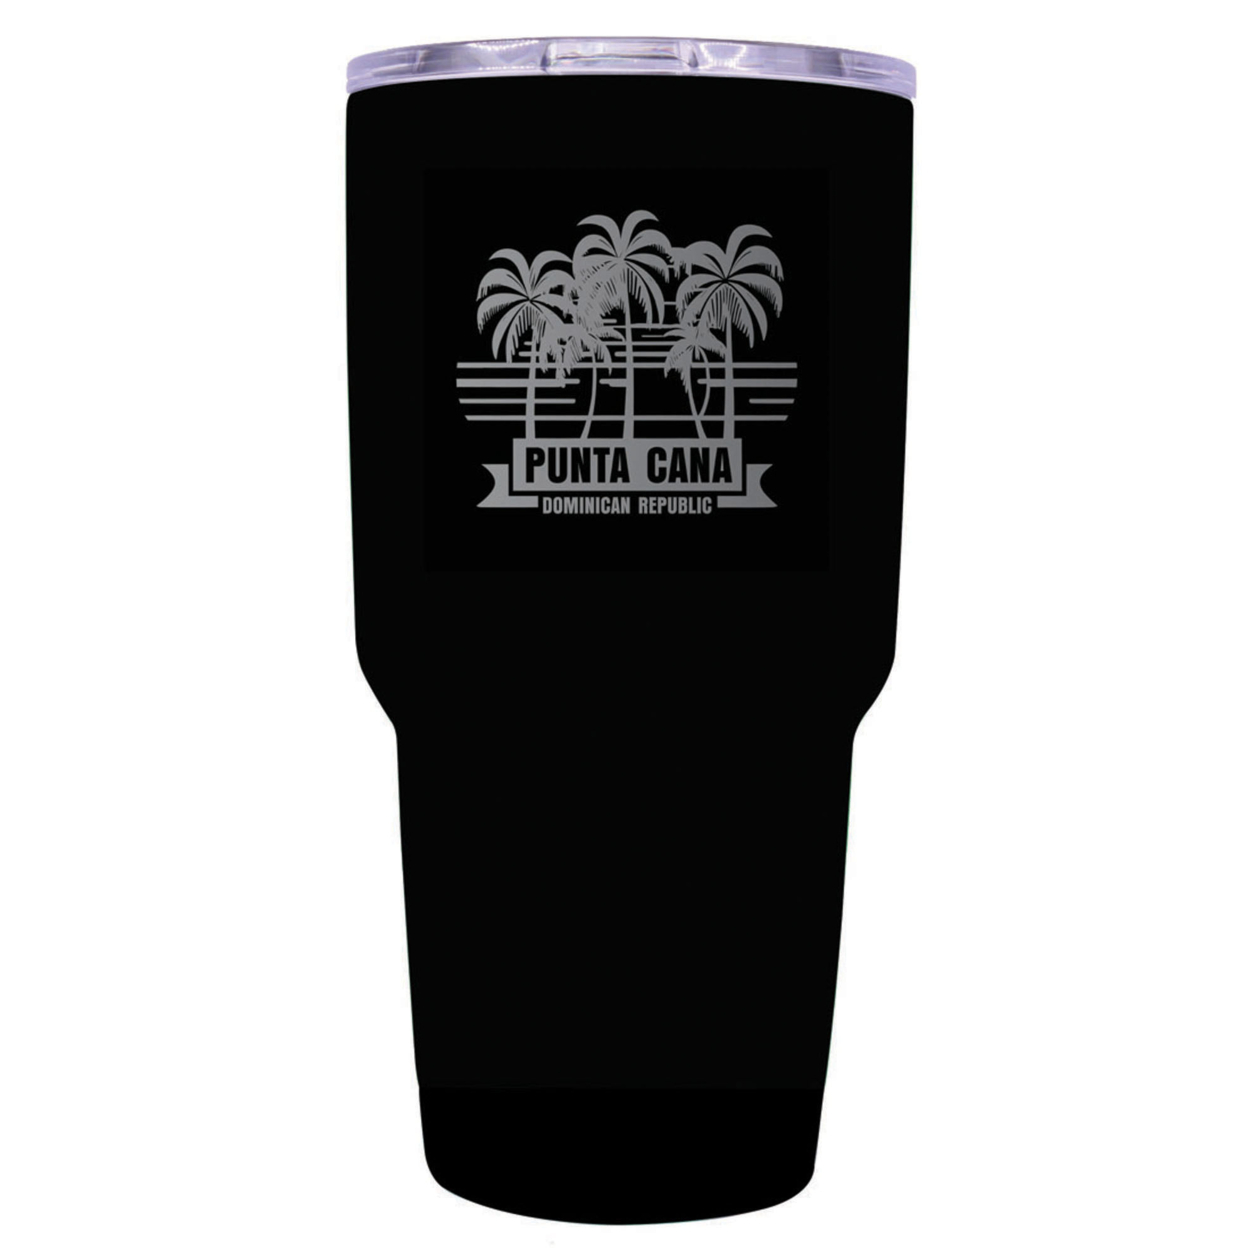 Punta Cana Dominican Republic Souvenir 24 Oz Insulated Stainless Steel Tumbler Etched - Green, PALM BEACH